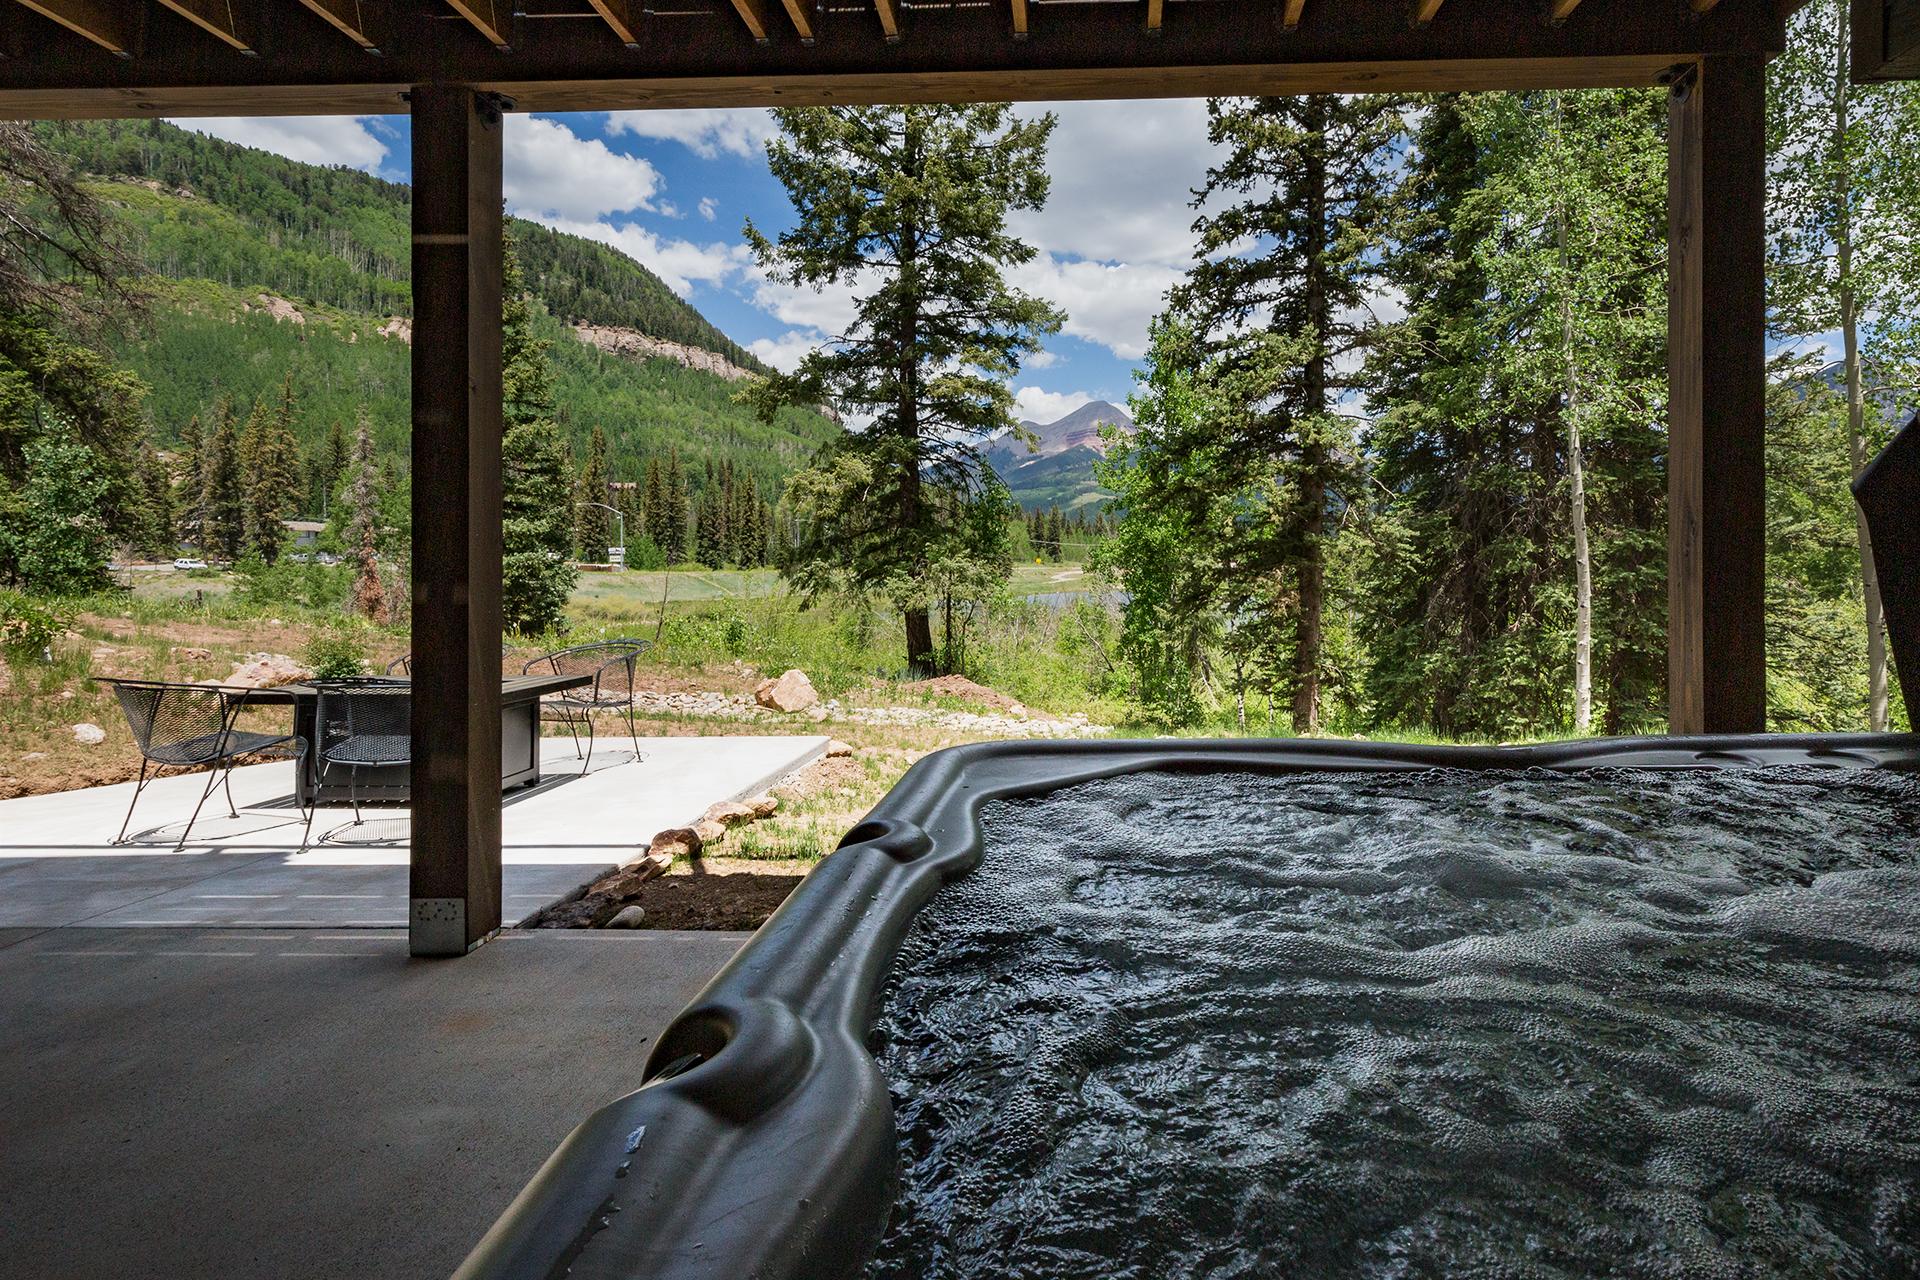 Private hot tub on the patio. Soak in mountain views!

Gas fire pit as well.